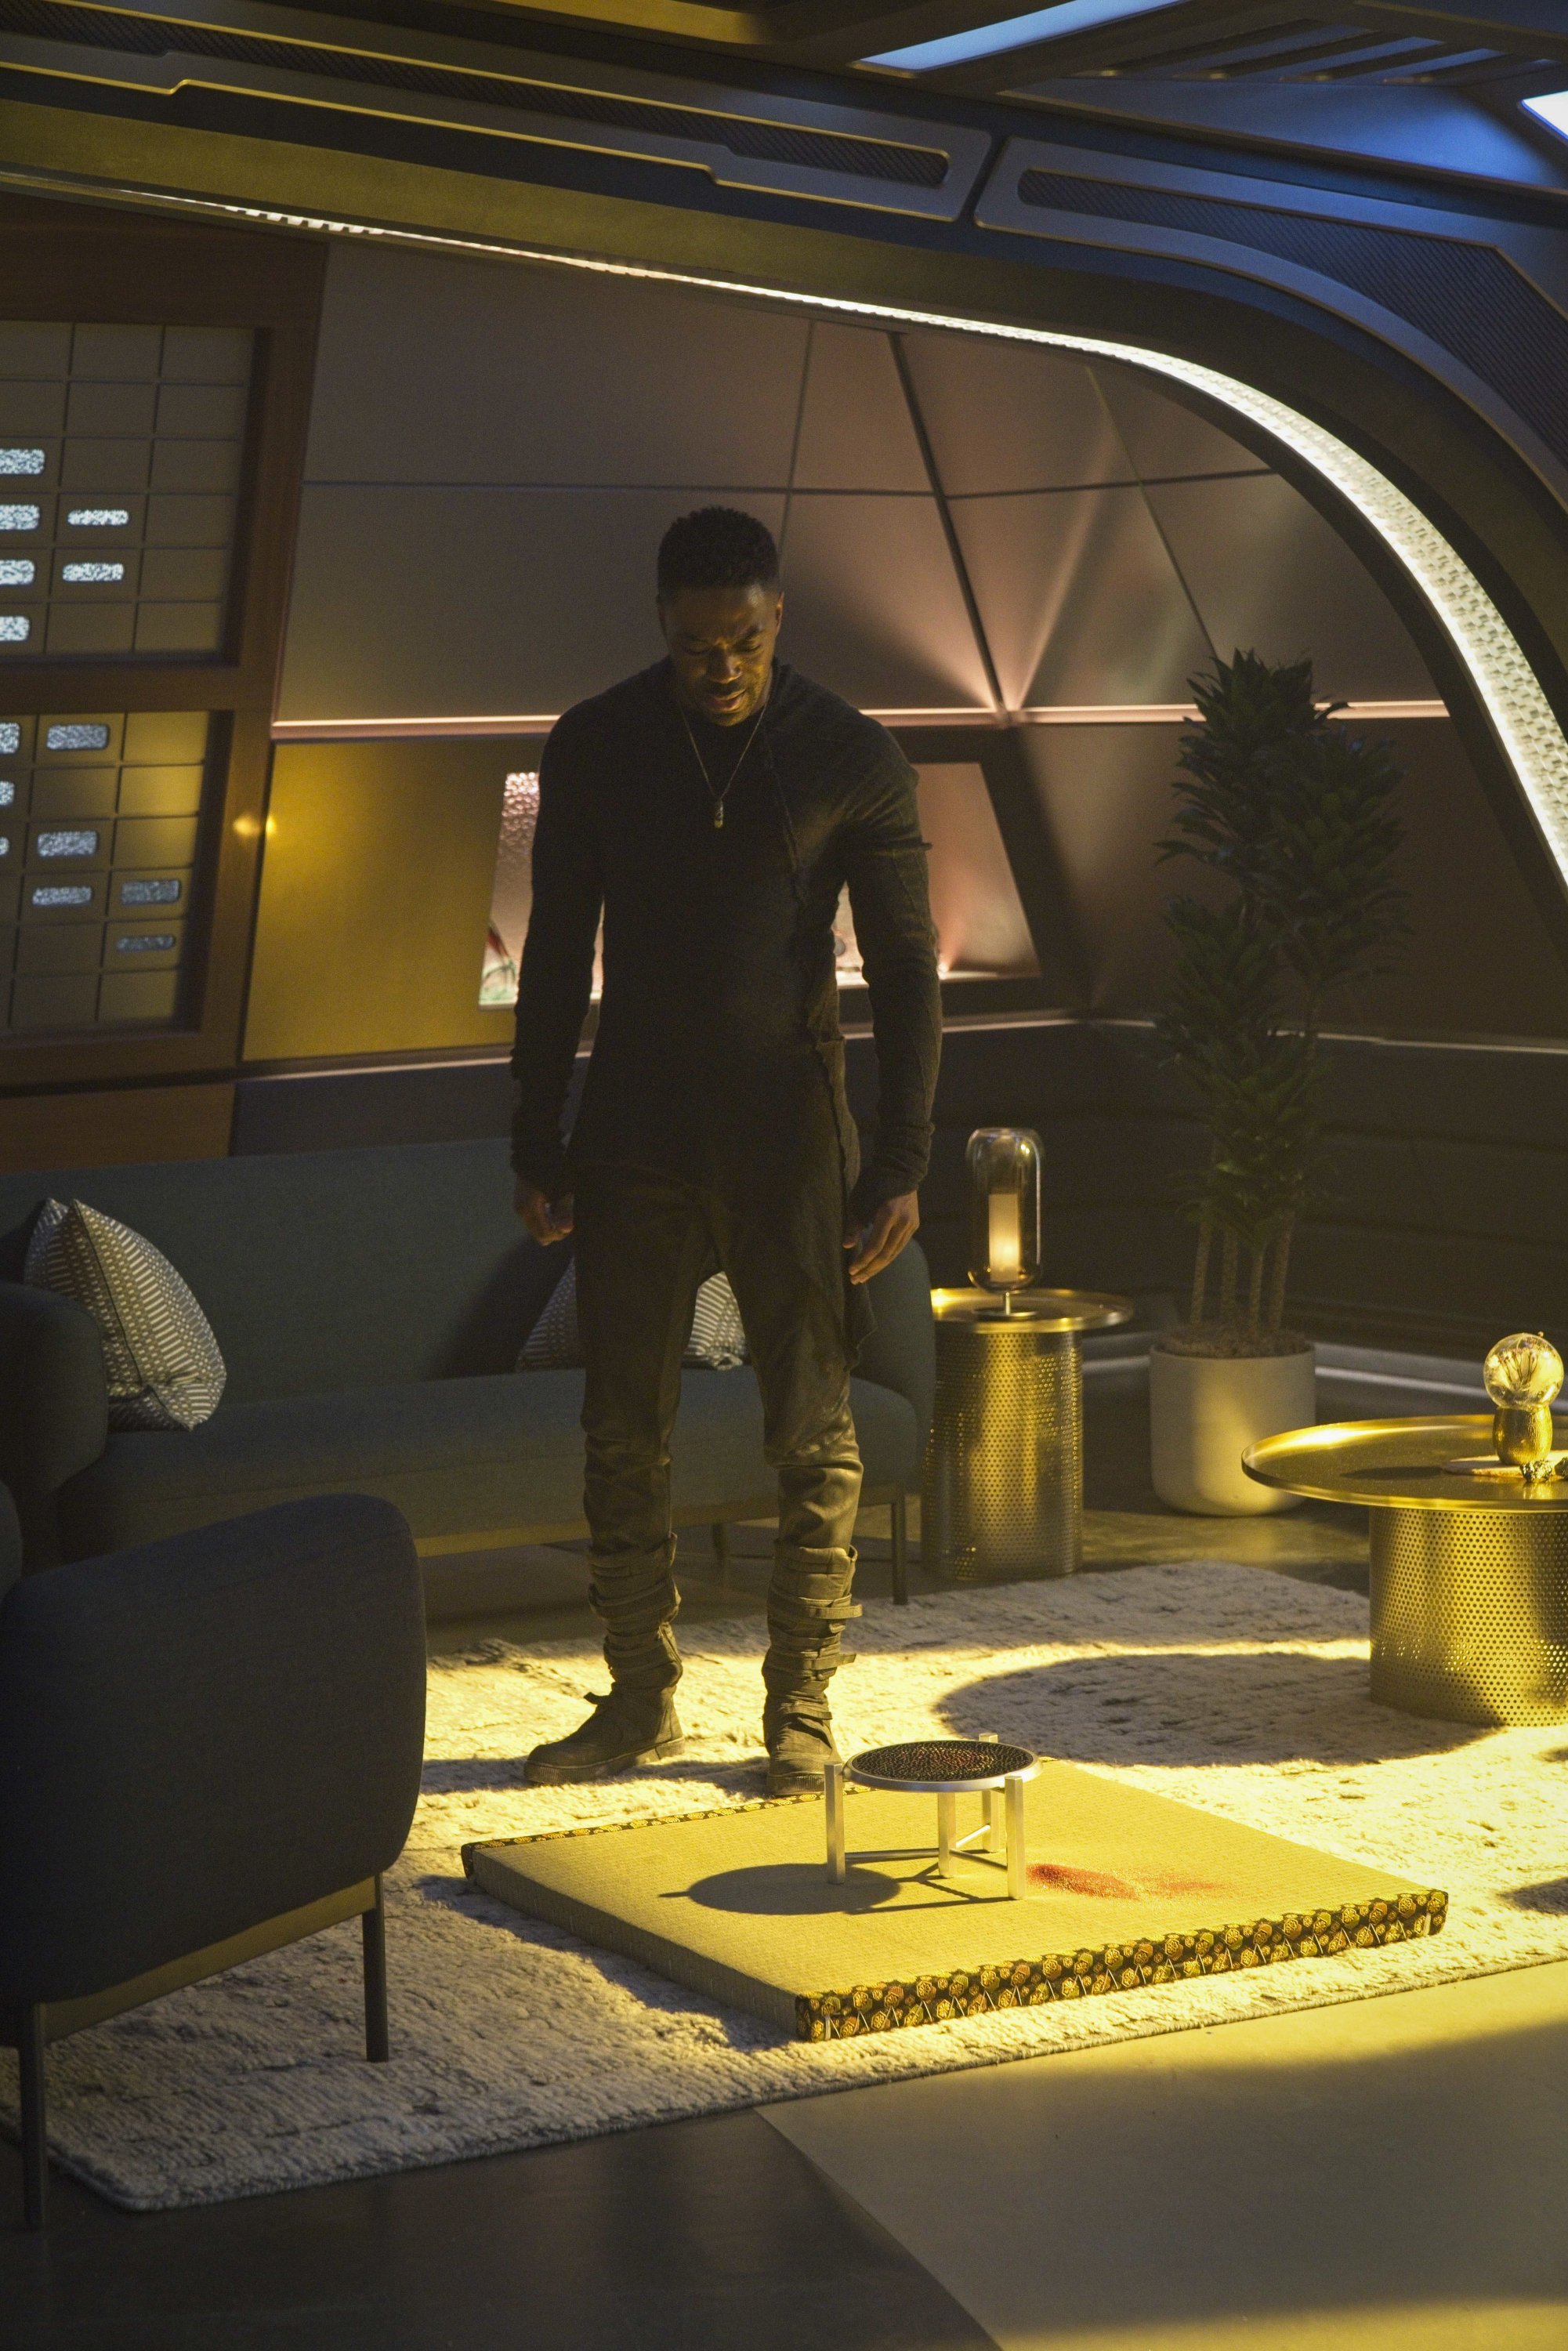   Pictured: David Ajala as Book of the Paramount+ original series STAR TREK: DISCOVERY. Photo Cr: Michael Gibson/Paramount+ © 2021 CBS Interactive. All Rights Reserved.  